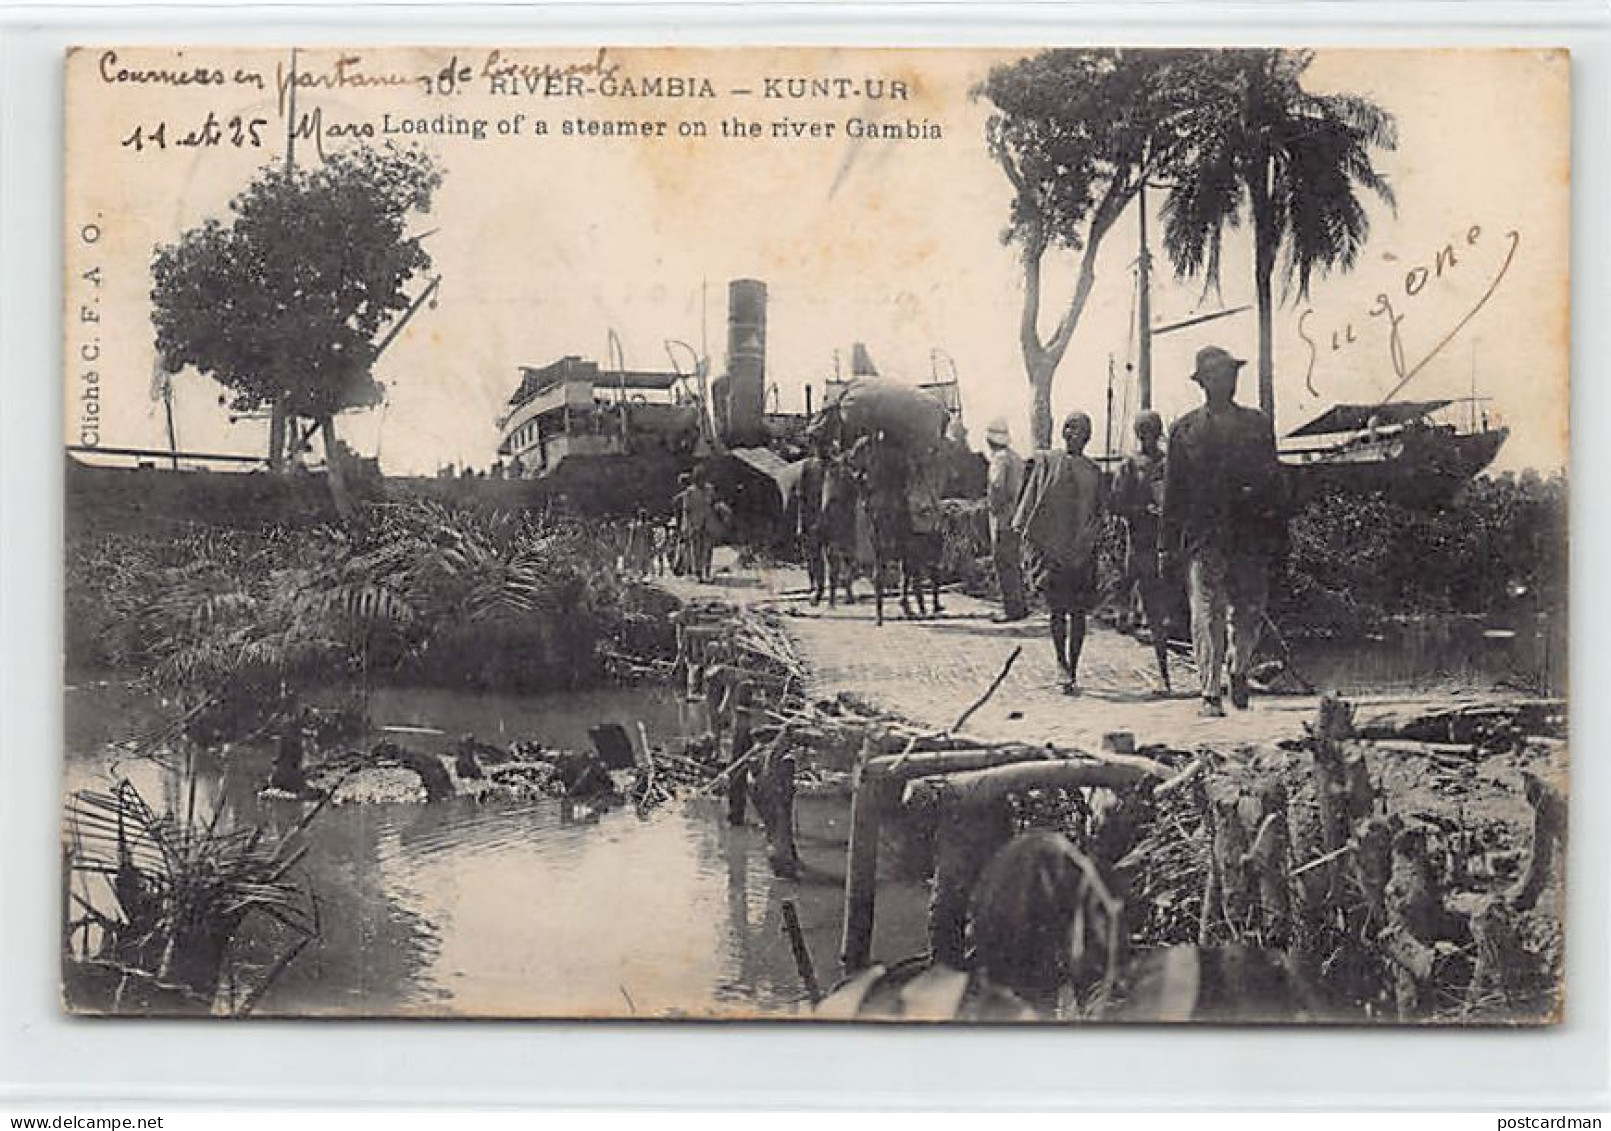 GAMBIA - KUNTAUR - Loading Of A Steamer On The River Gambia - Publ. C.F.A.O. 10 - Gambie